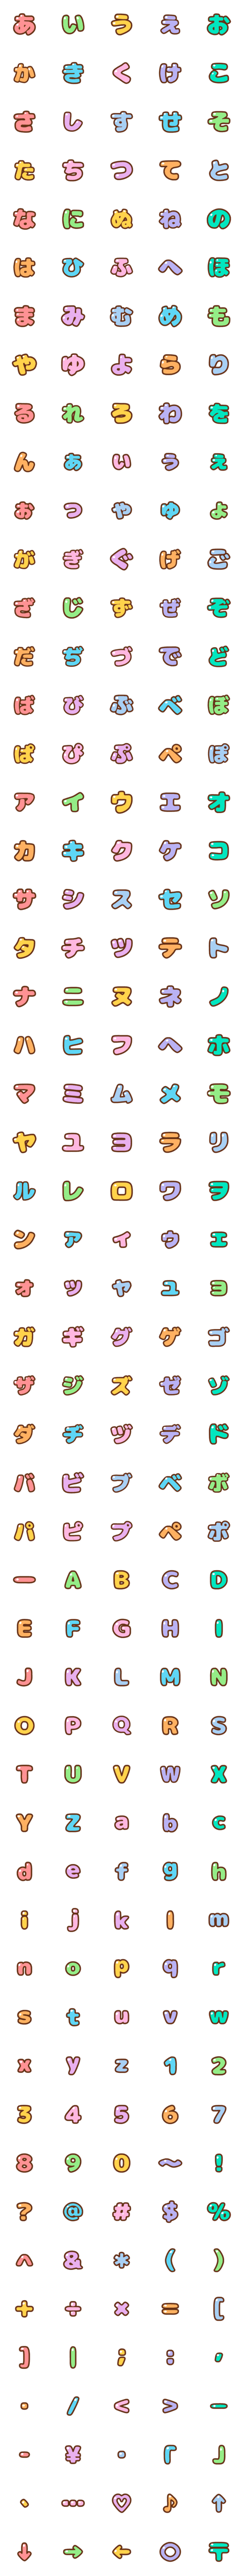 [LINE絵文字]❤️まわる！ デコ文字【265文字】の画像一覧